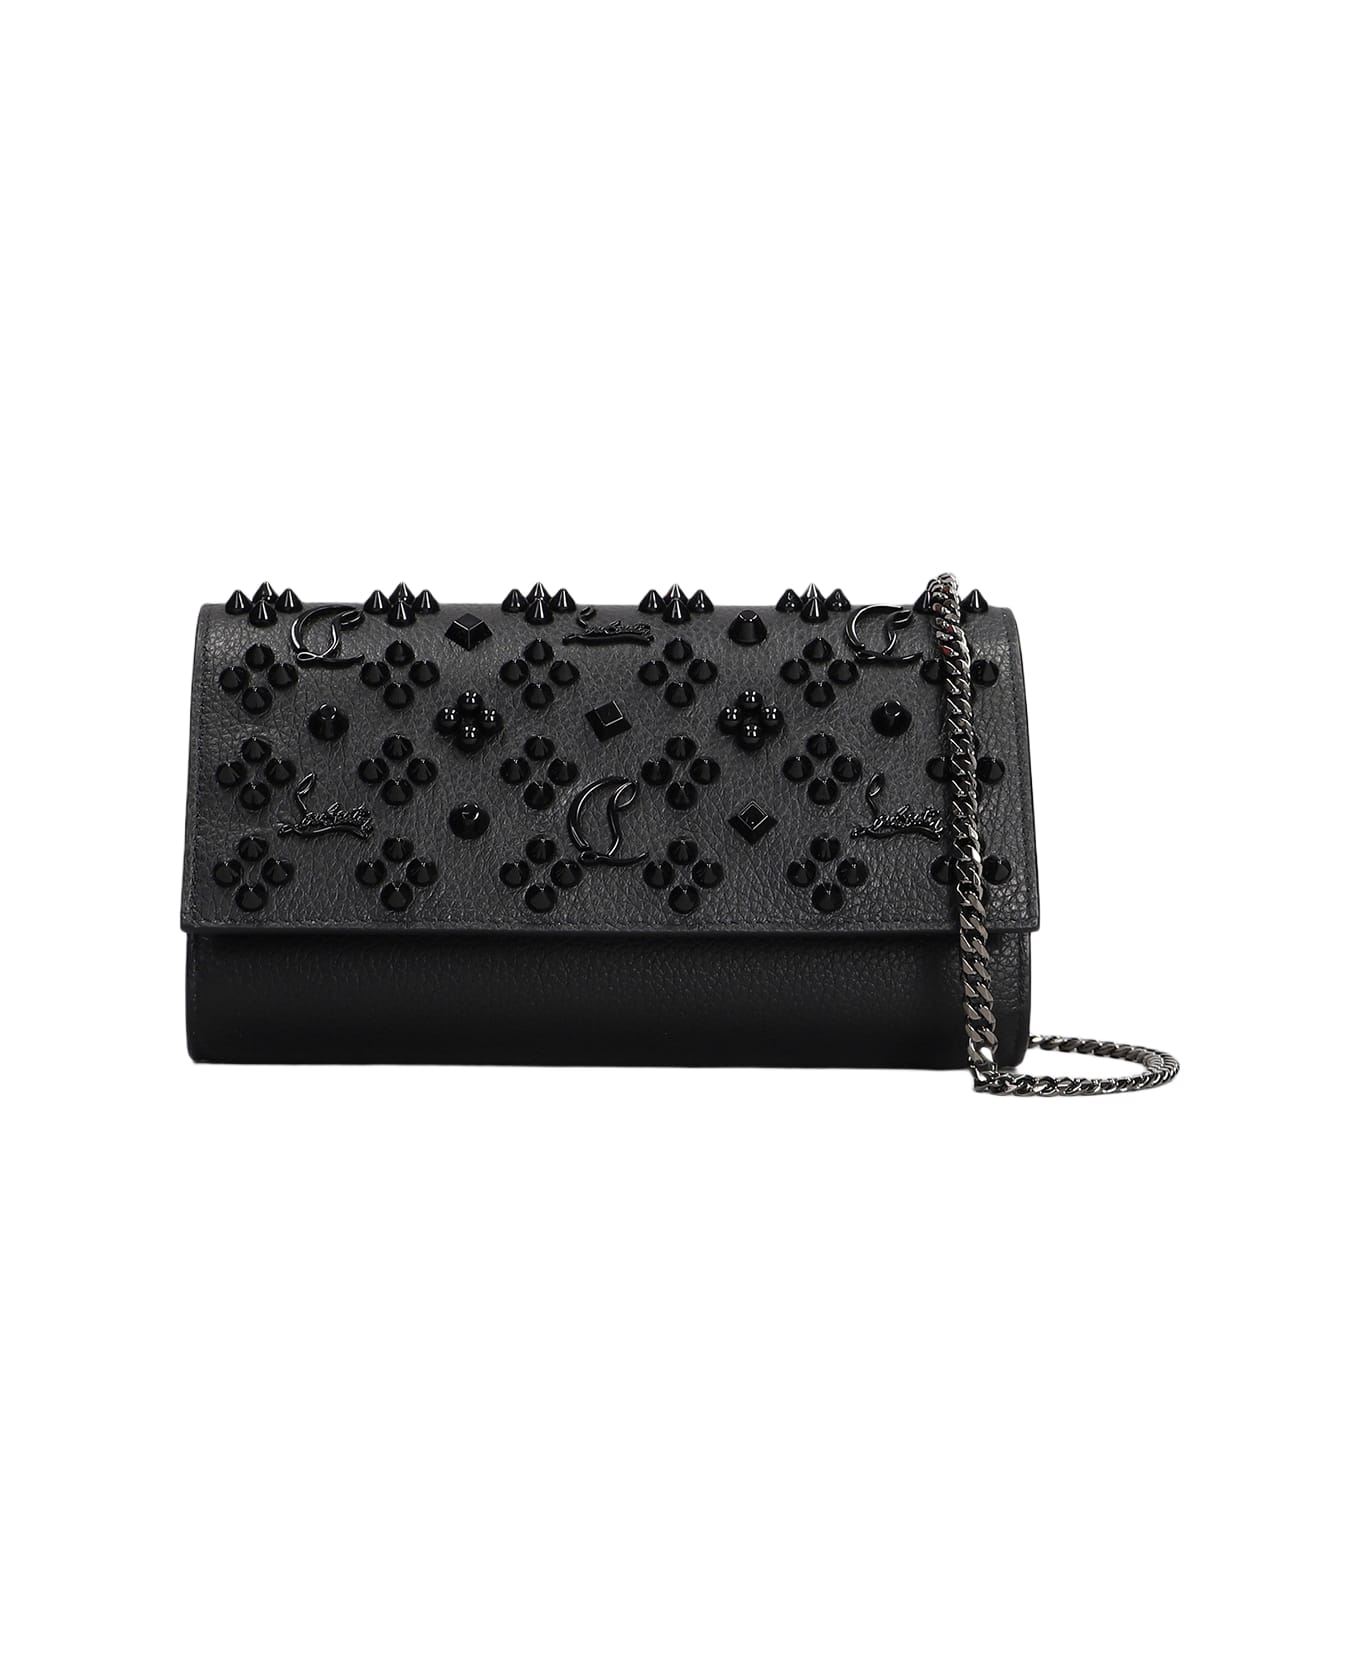 Christian Louboutin Paloma Clutch In Black Leather - Black ショルダーバッグ